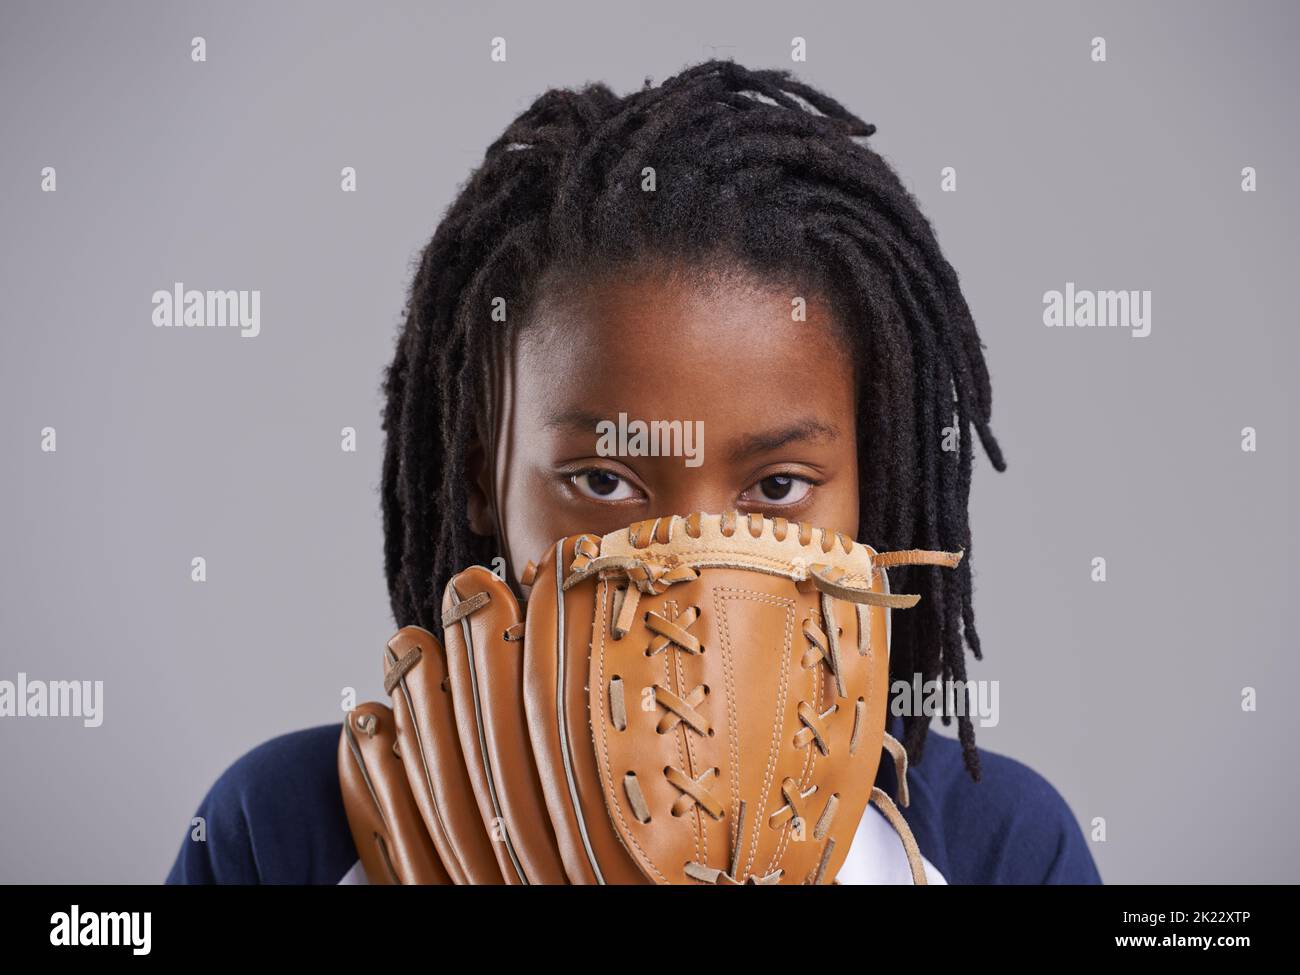 He has his eye on the ball. Studio shot of a young boy with baseball gear. Stock Photo